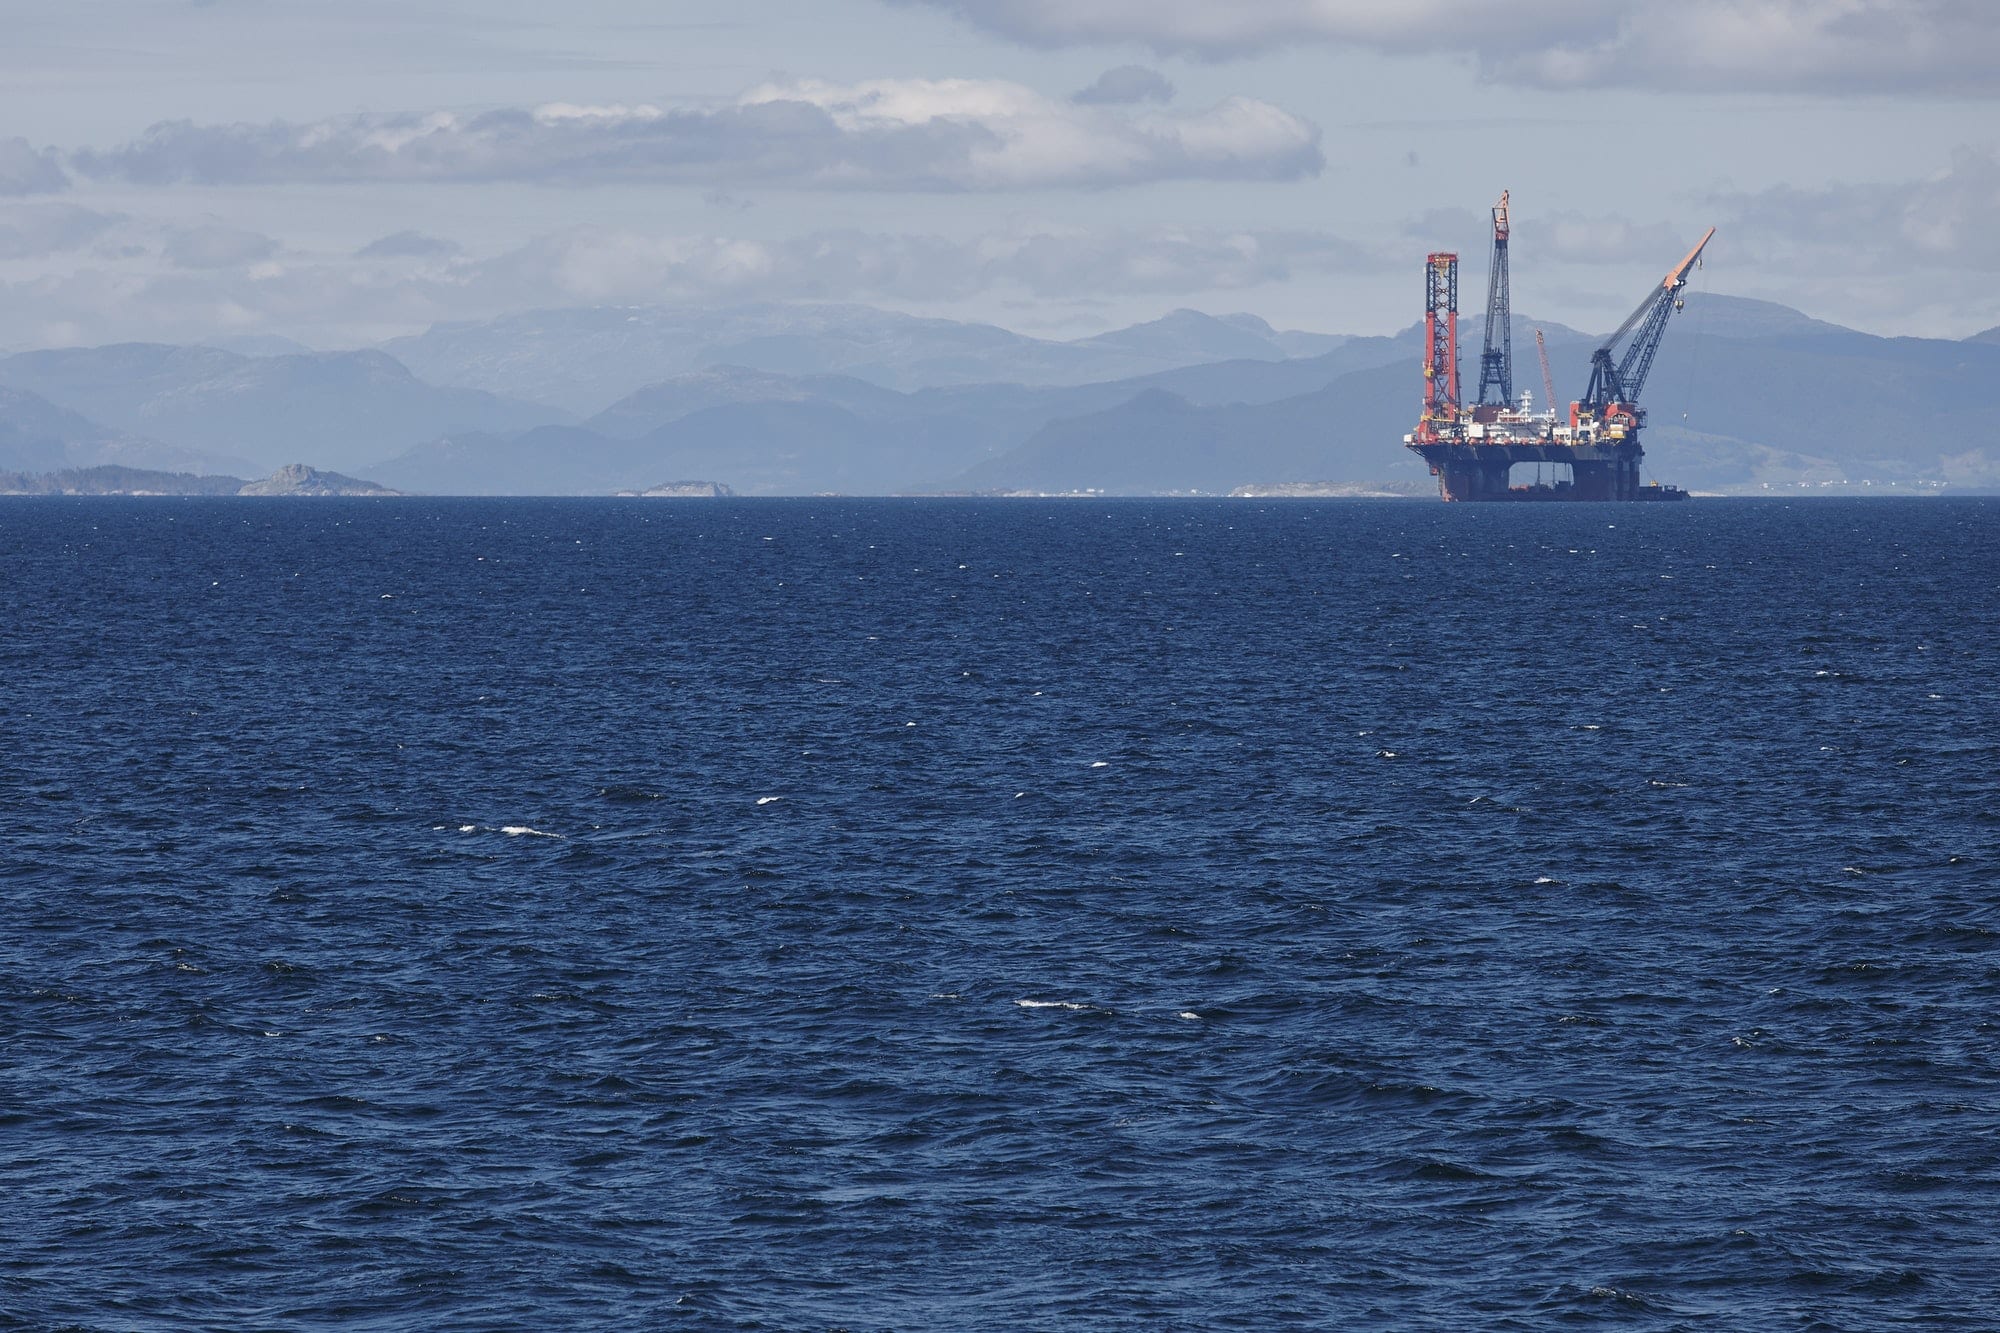 Oil and gas offshore platform in Norway. Energy industry. Petroleum